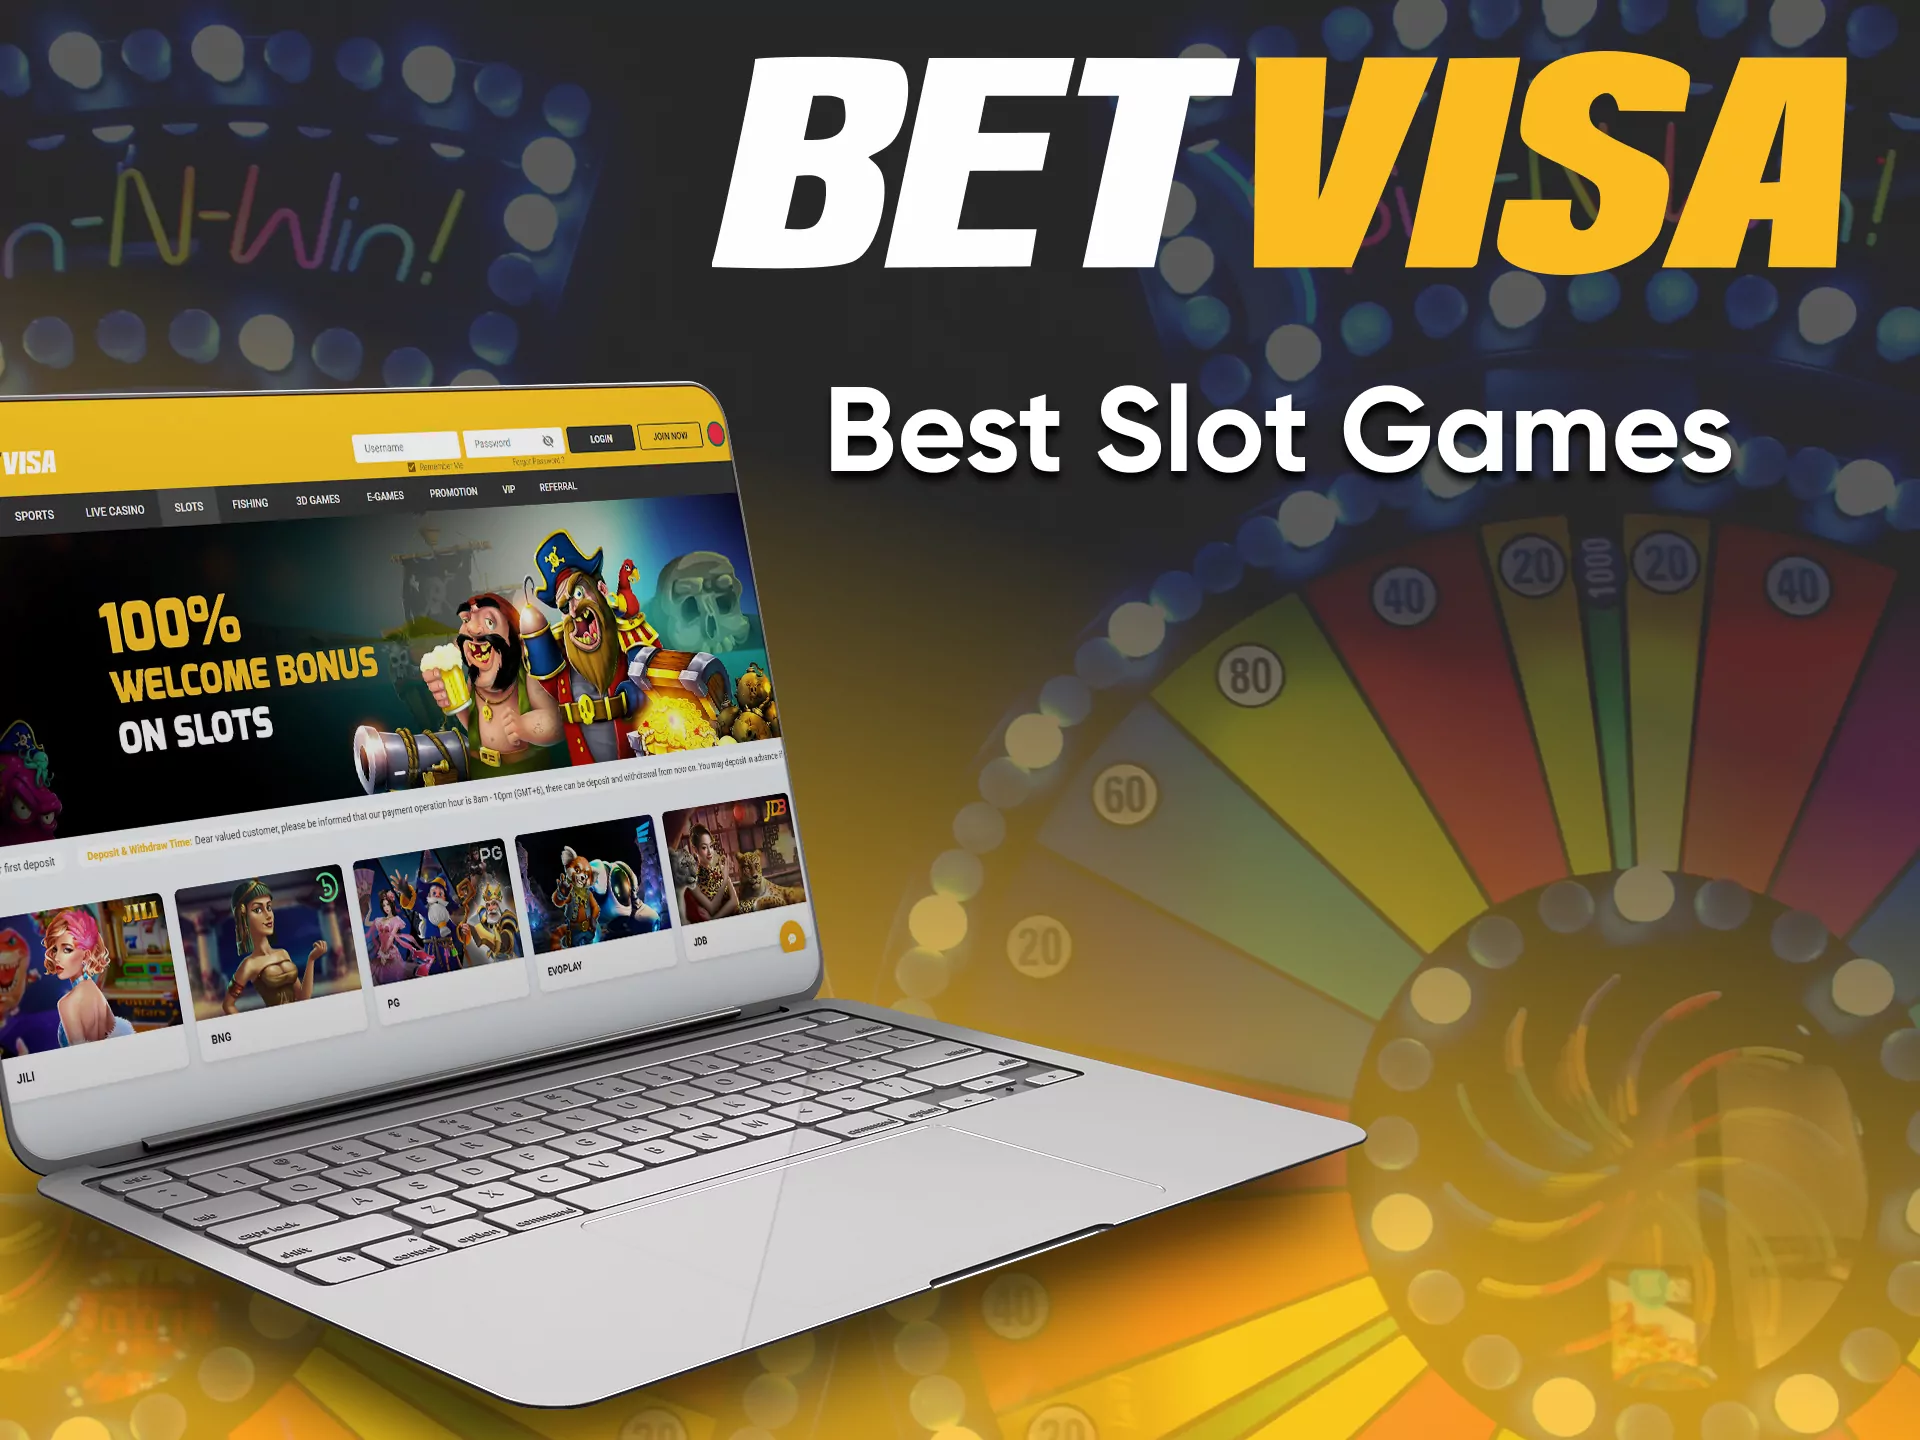 You can play slots in the BetVisa Online Casino.